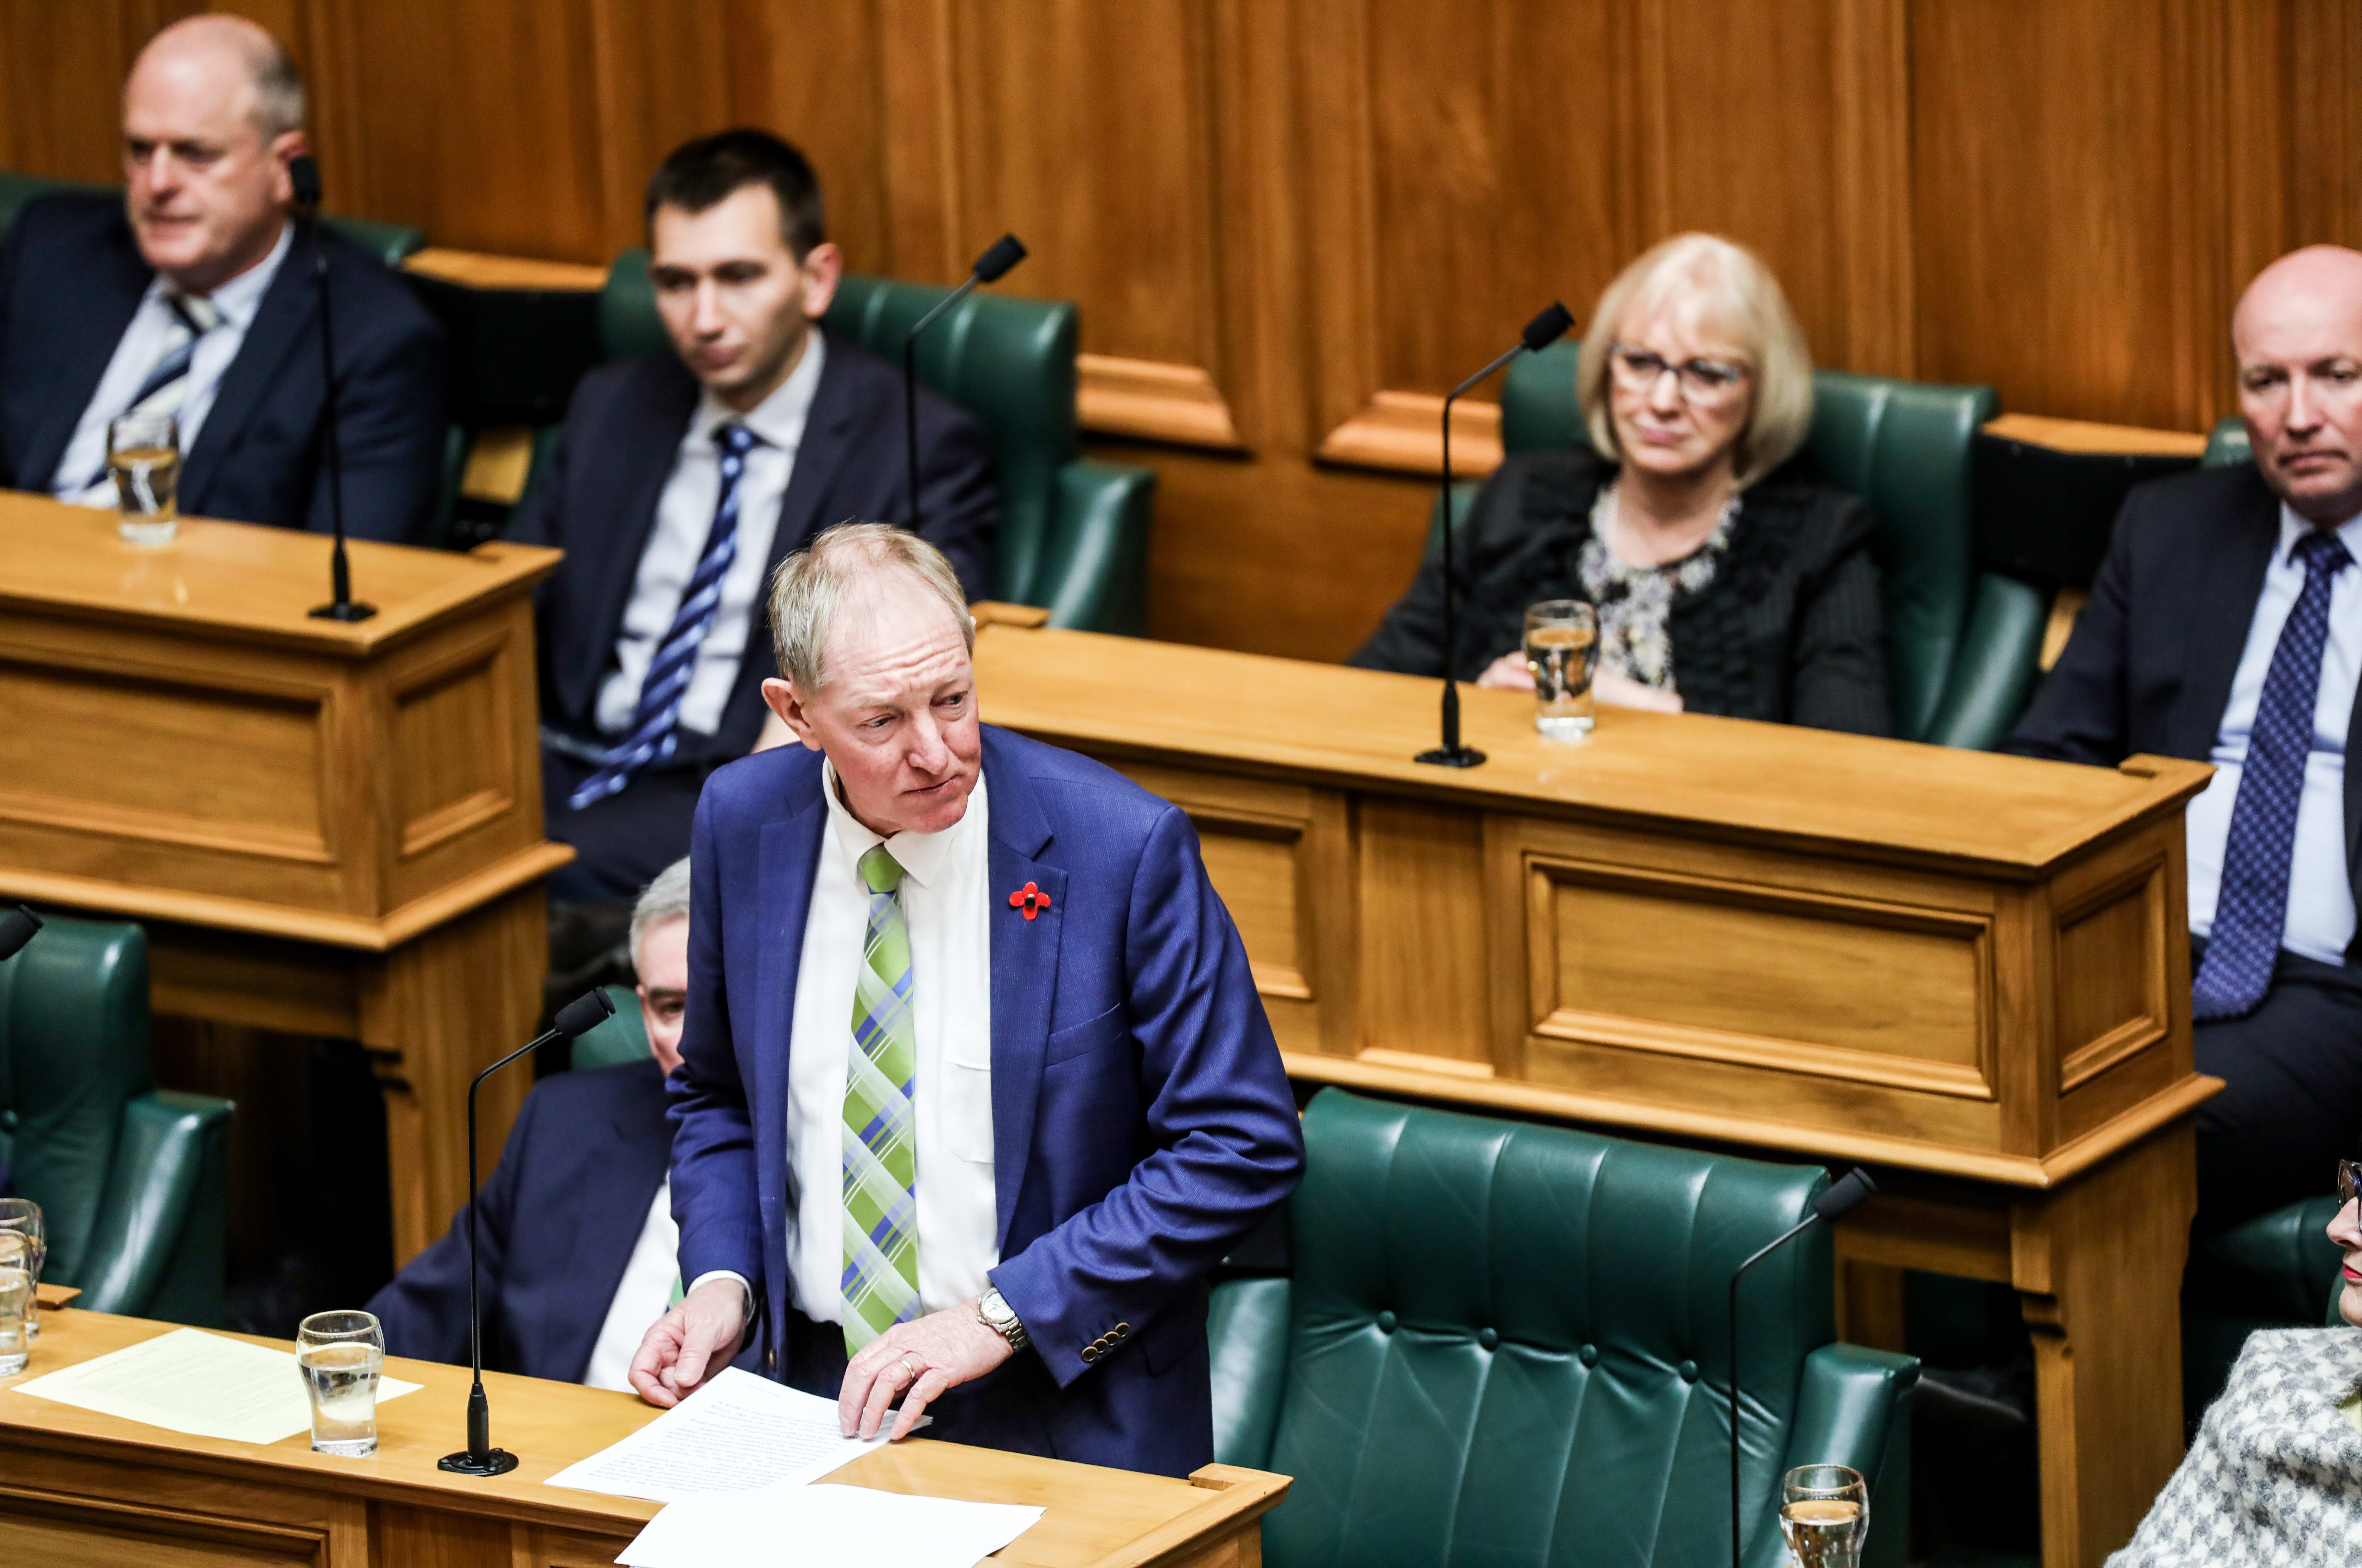 Departing National MP Nick Smith gives his valedictory statement to the House after three decades at Parliament